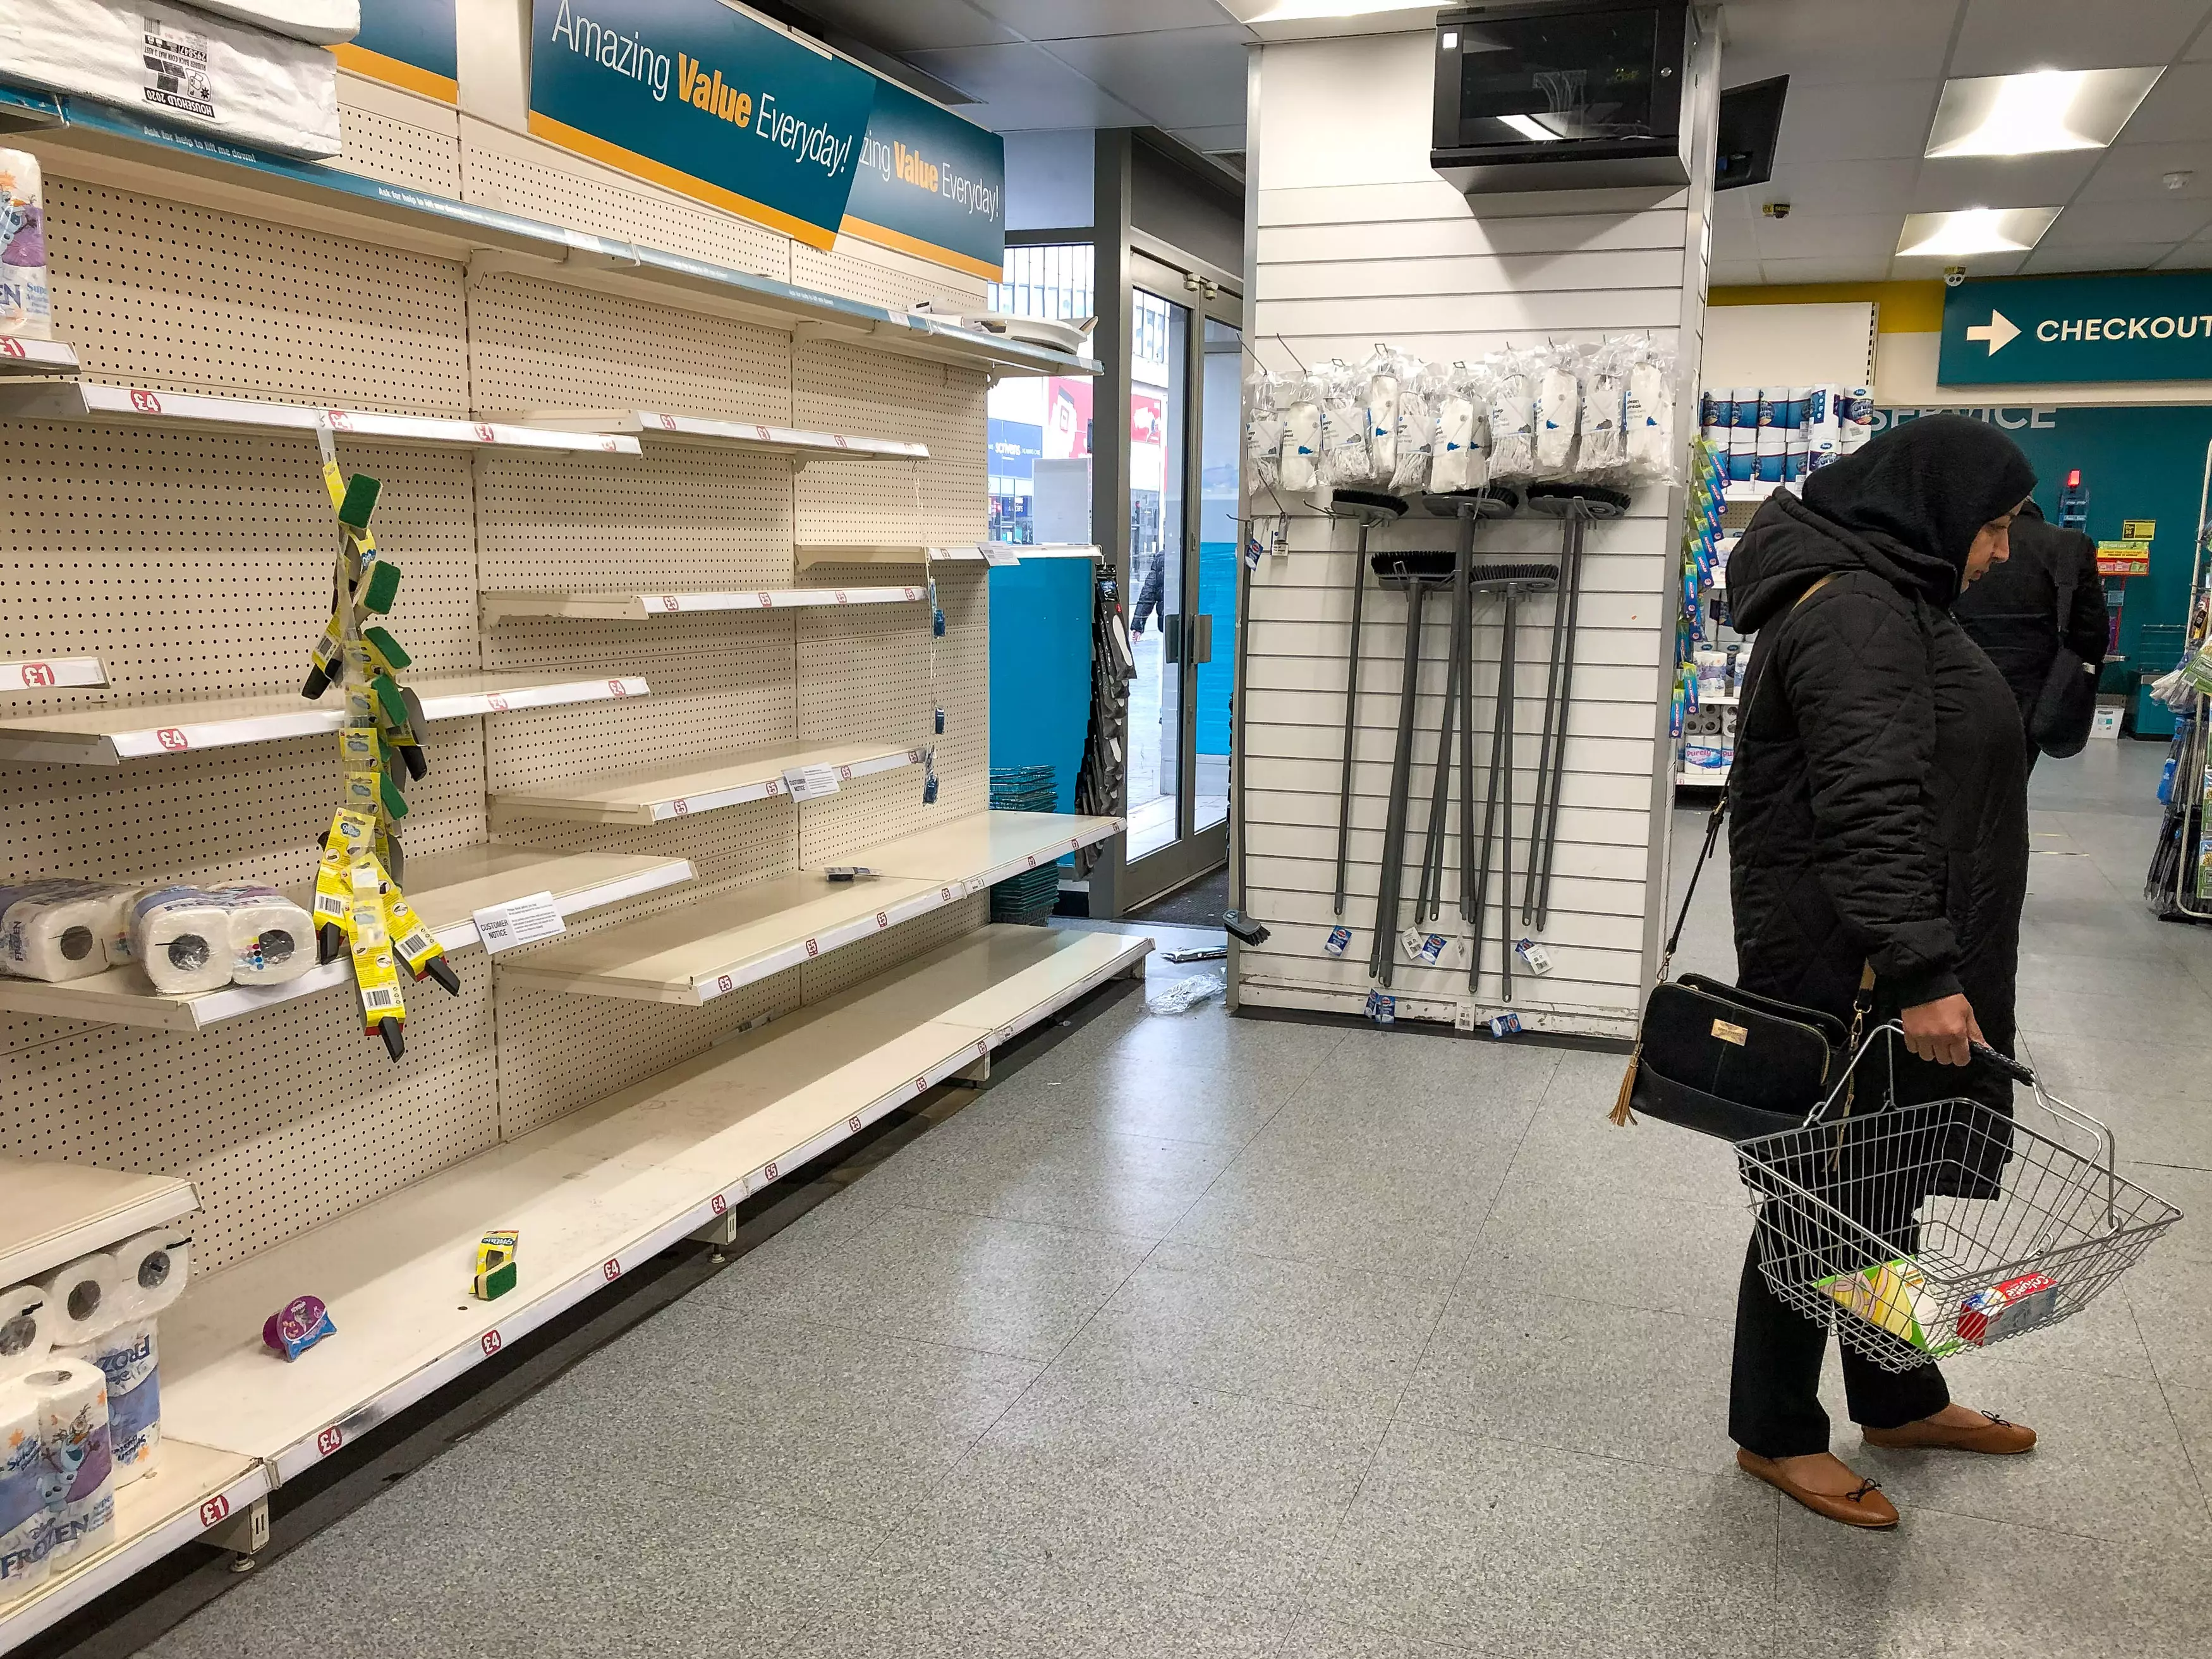 Shoppers in Poundland.